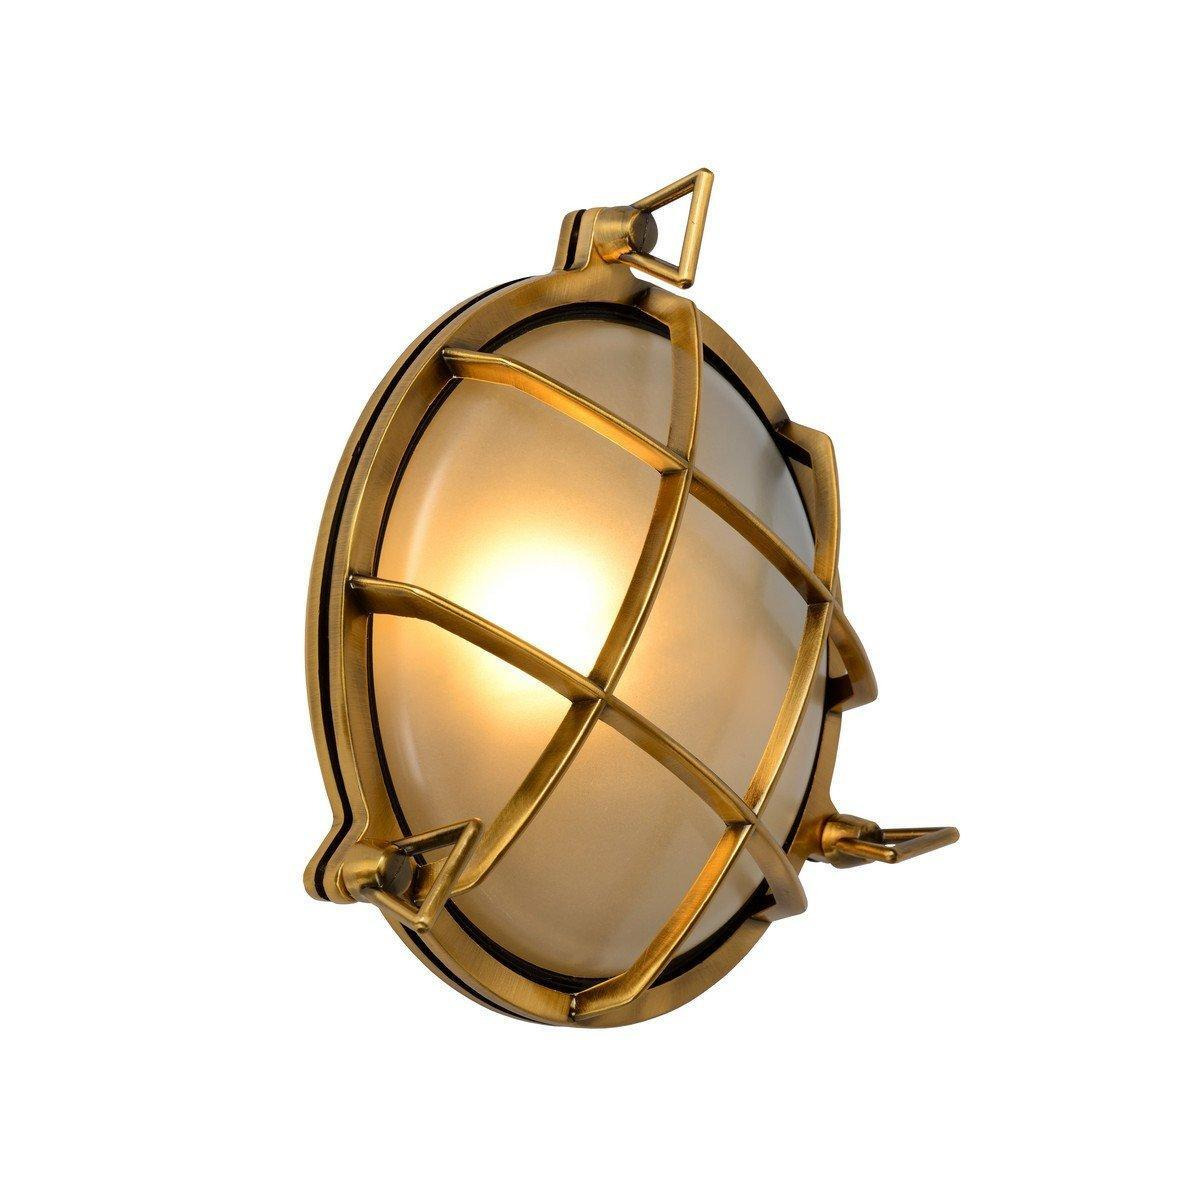 'DUDLEY' Dimmable Stylish Round Outdoor Bulkhead Wall Light 1xE27 - image 1